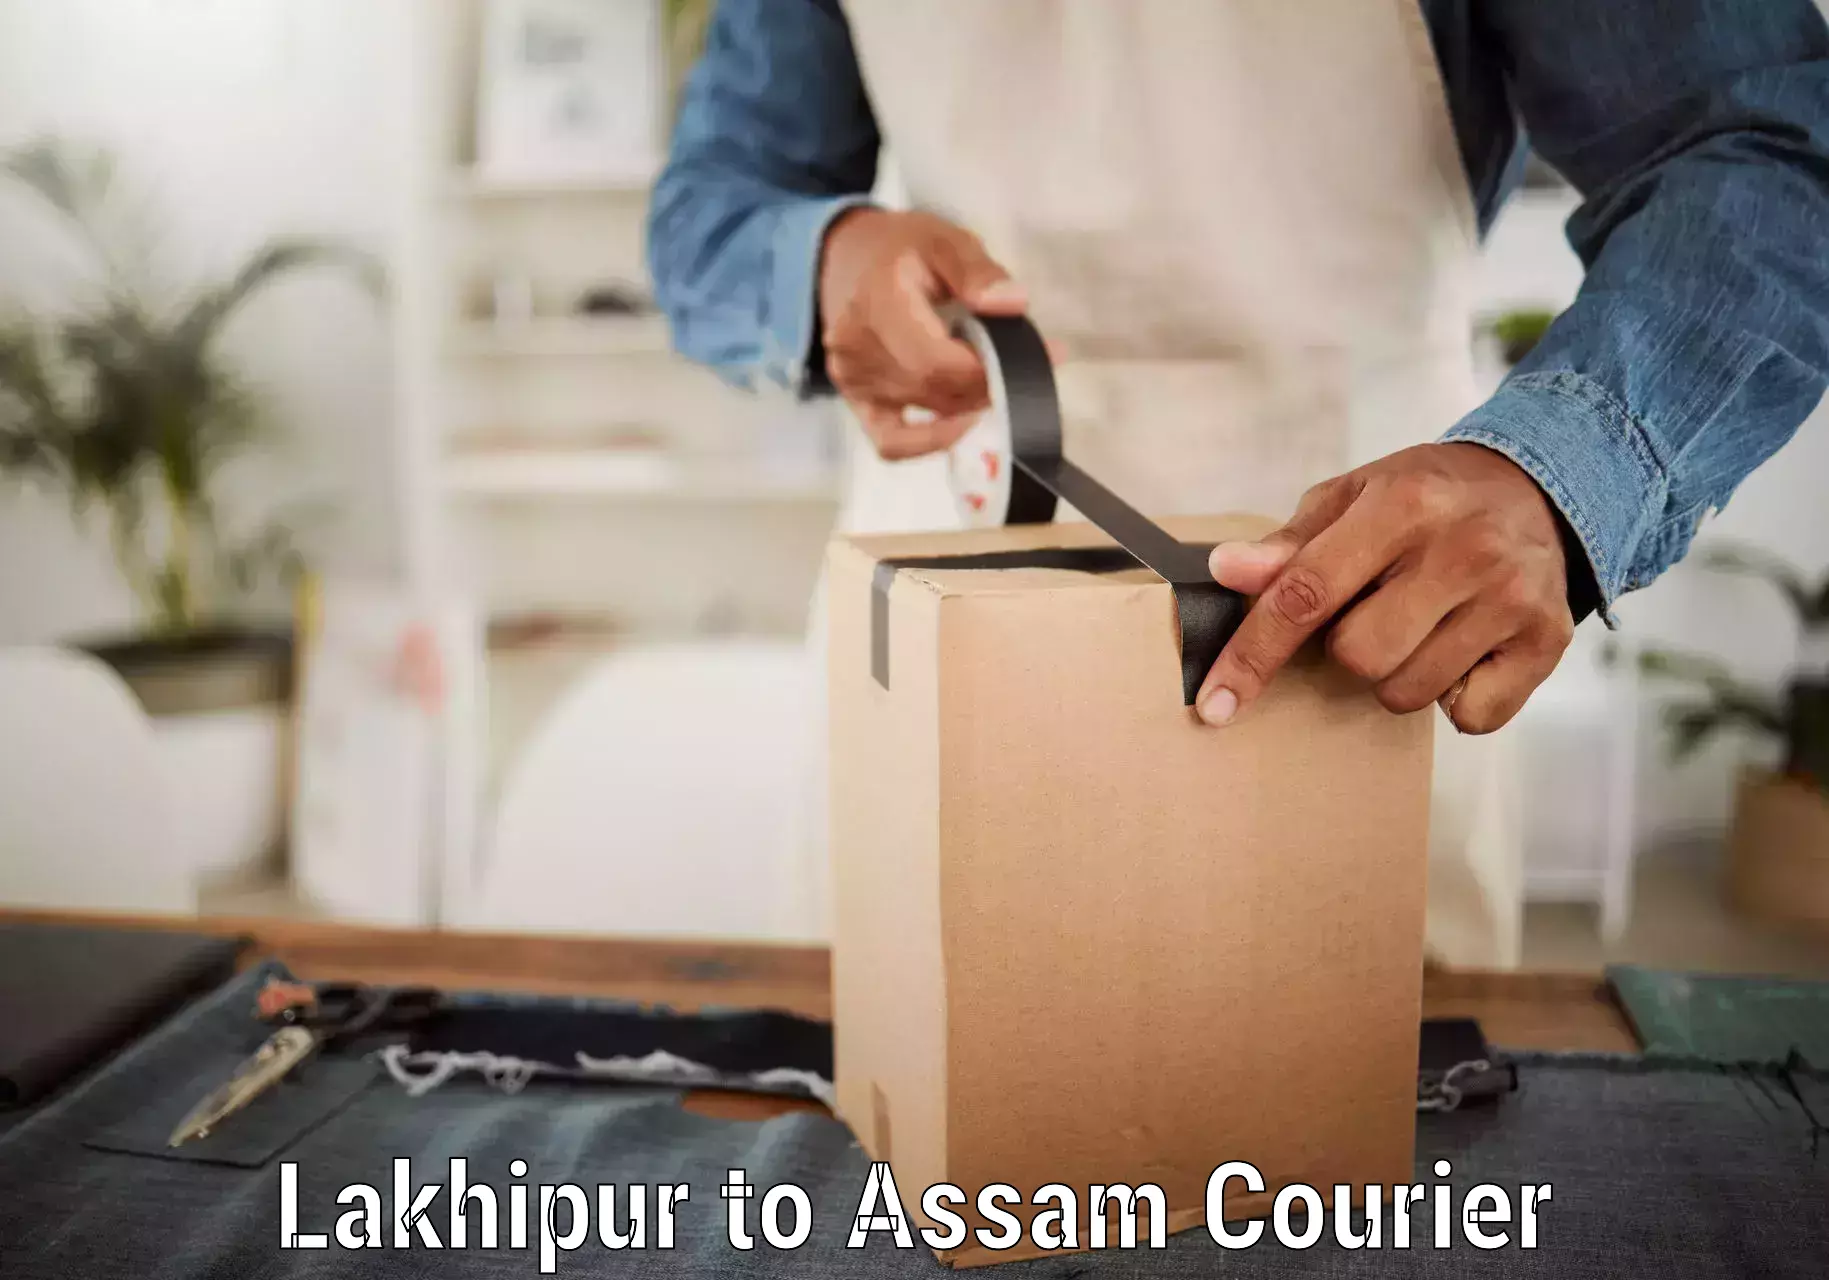 Same-day delivery options Lakhipur to Bongaigaon